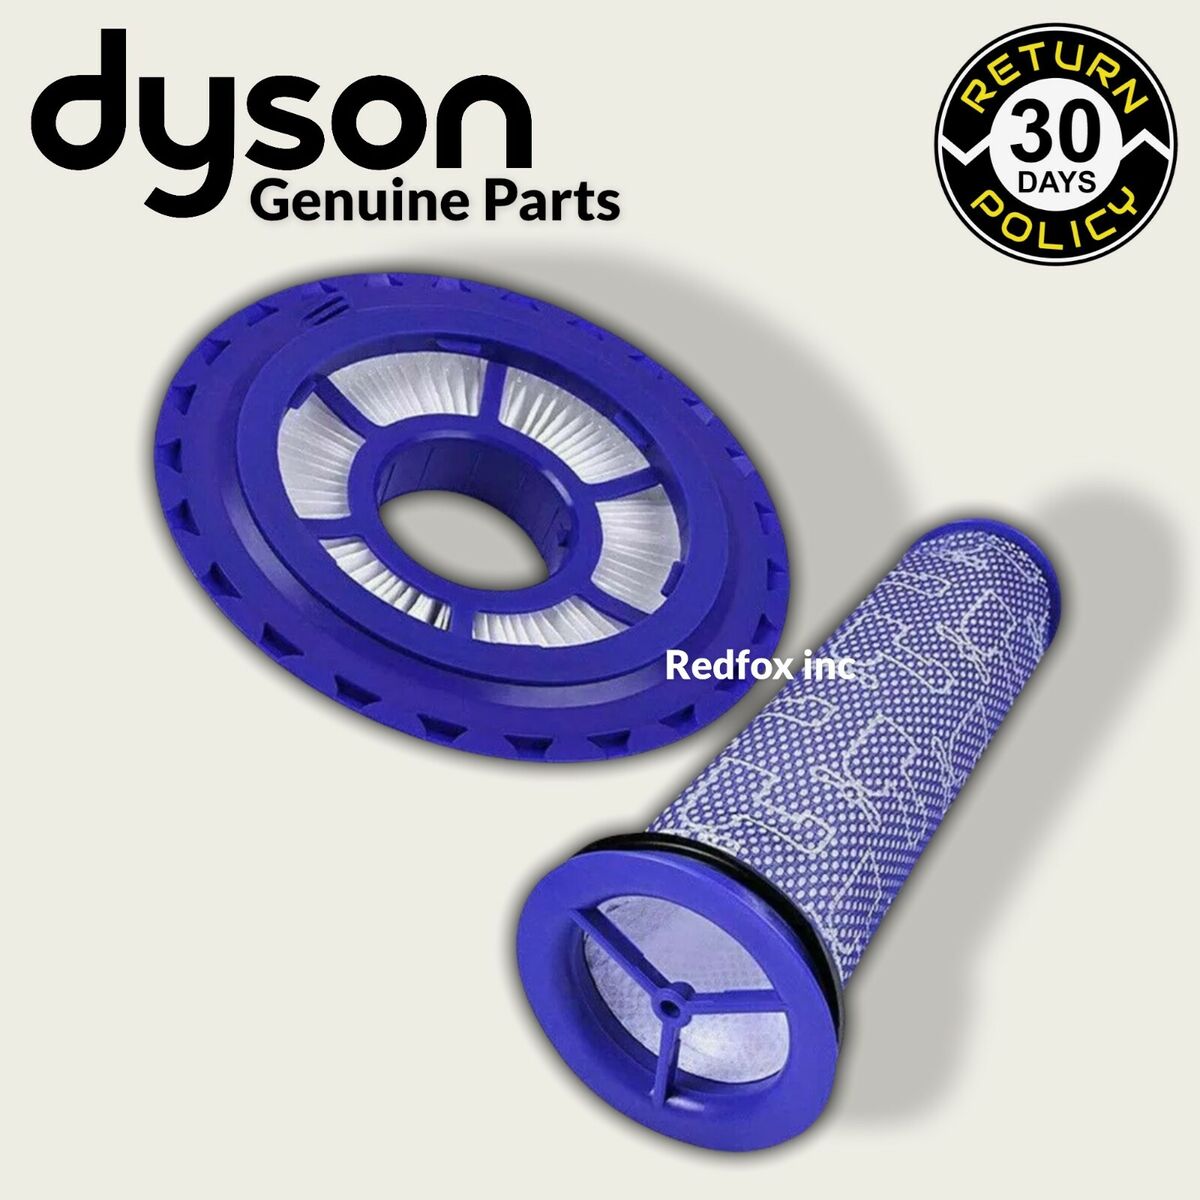 genuine dyson filters